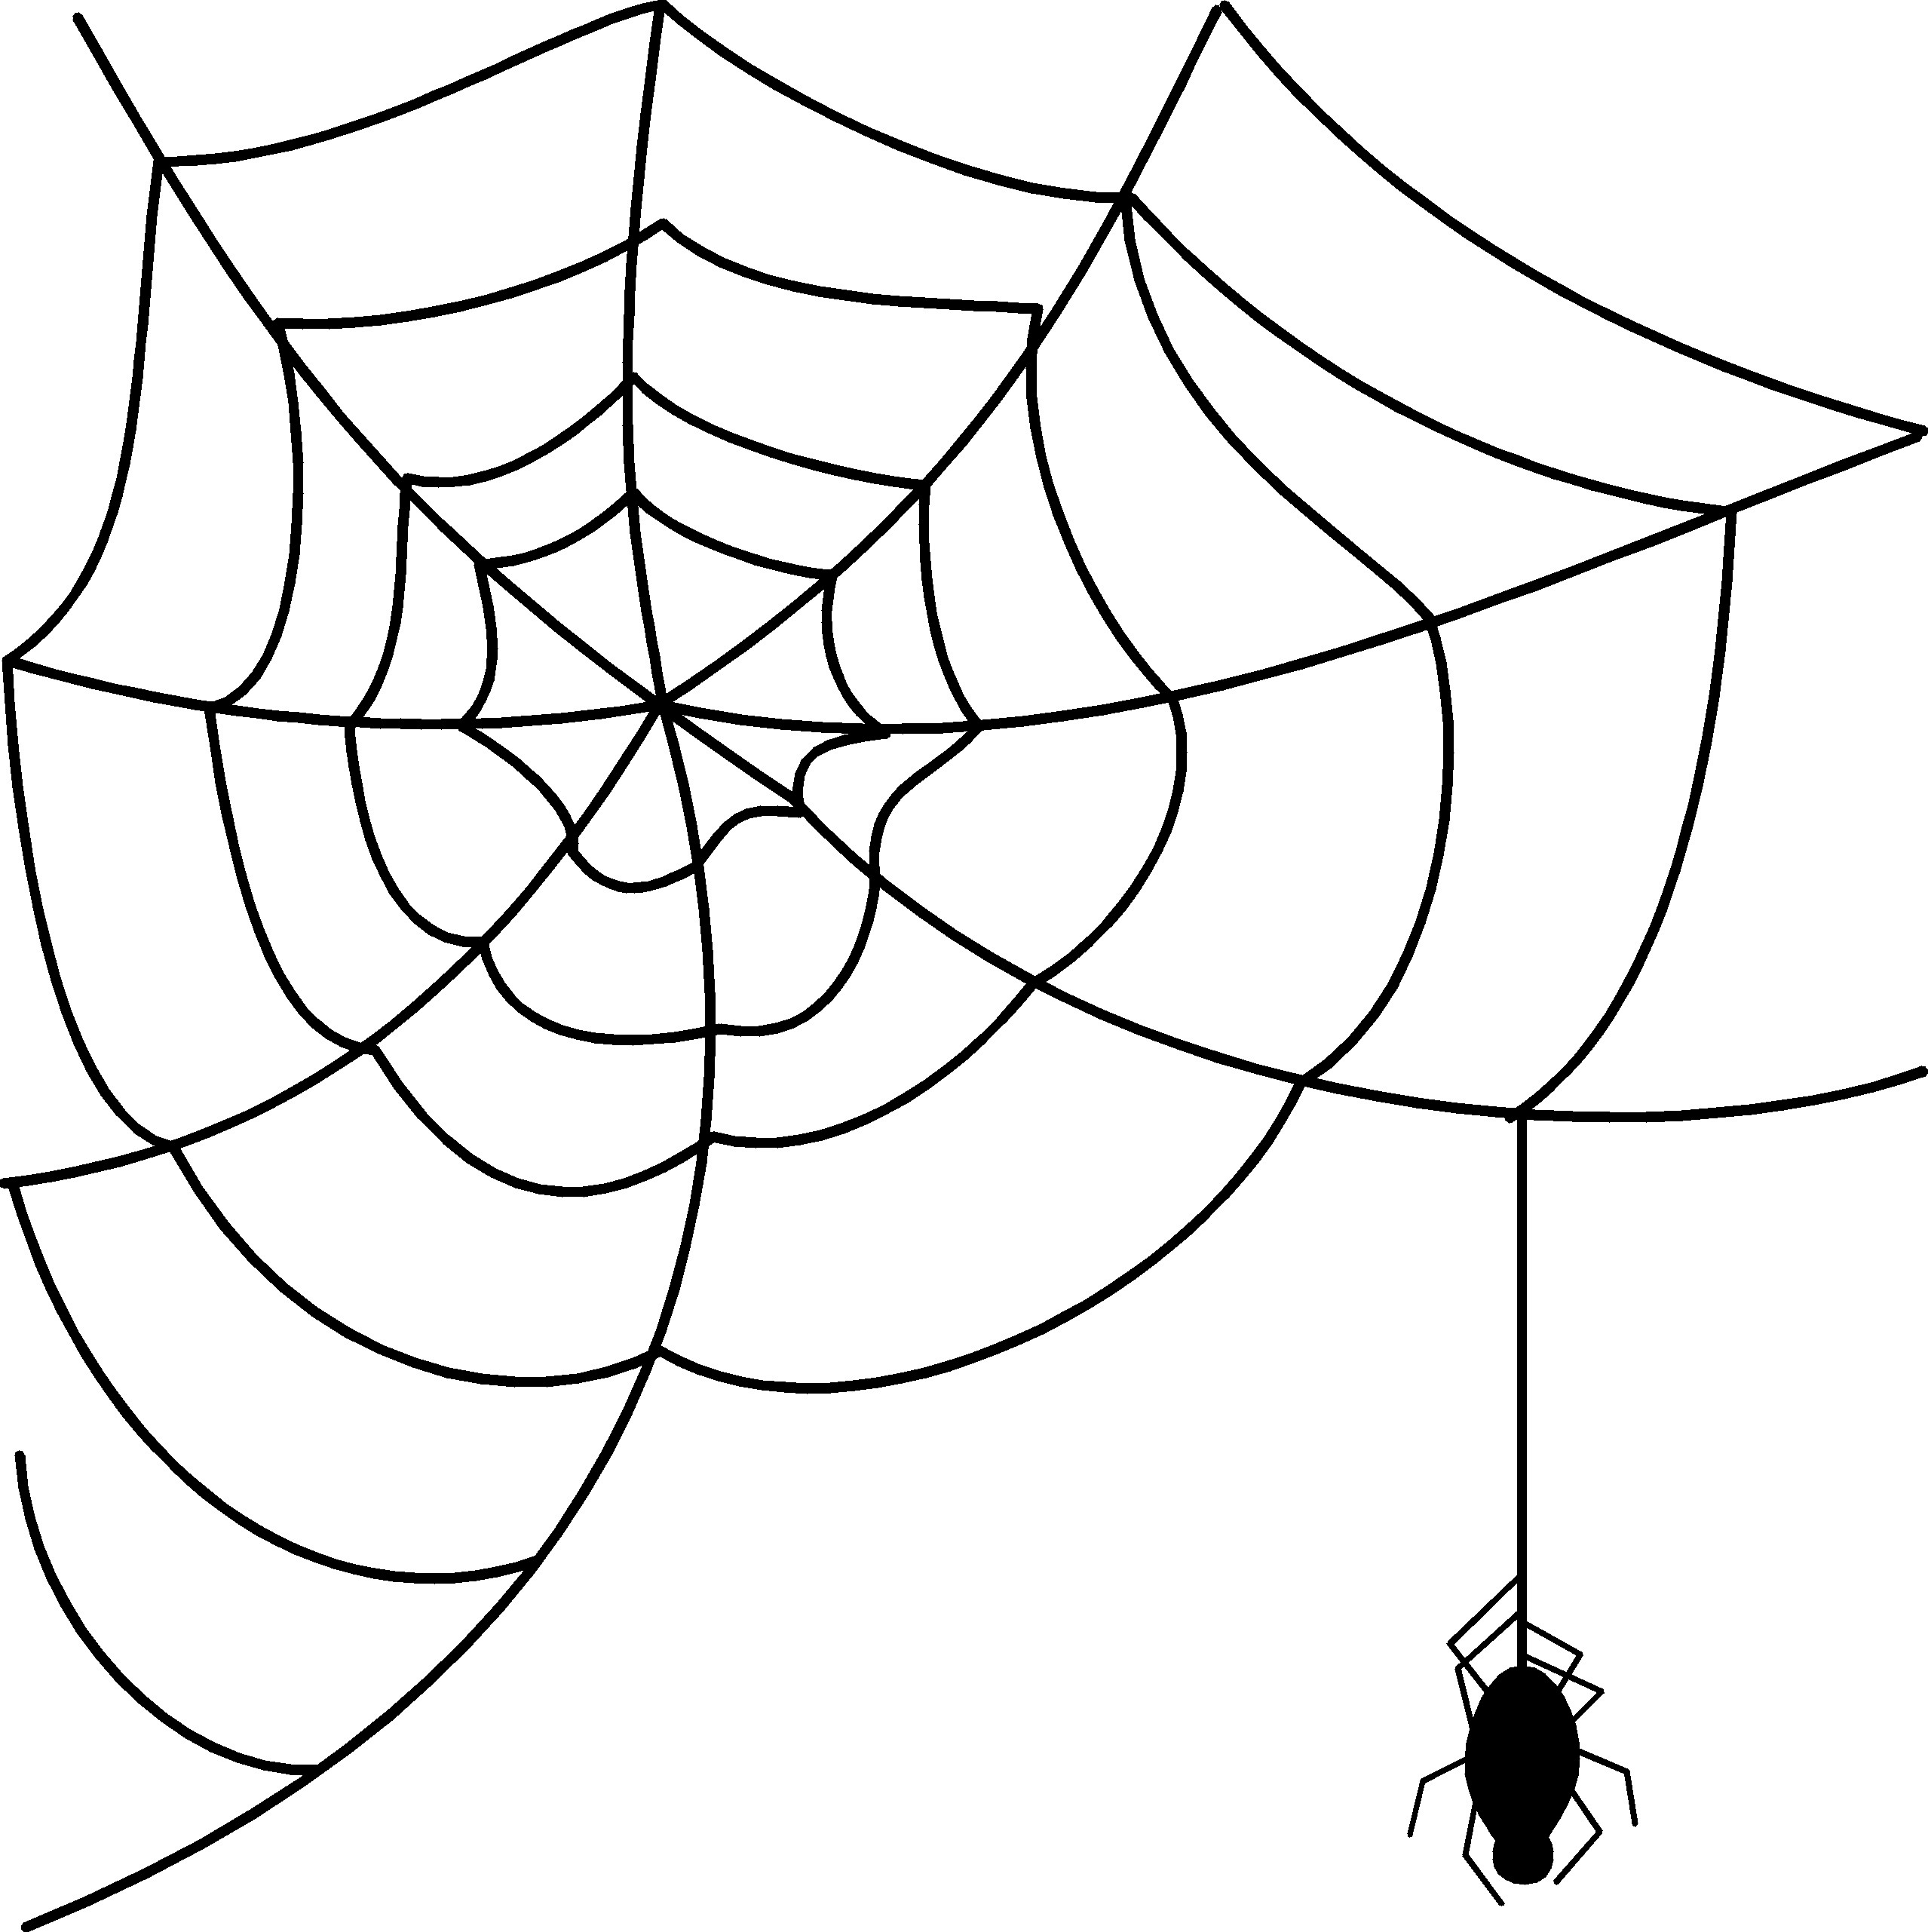 Spider web border clipart free images 6 3